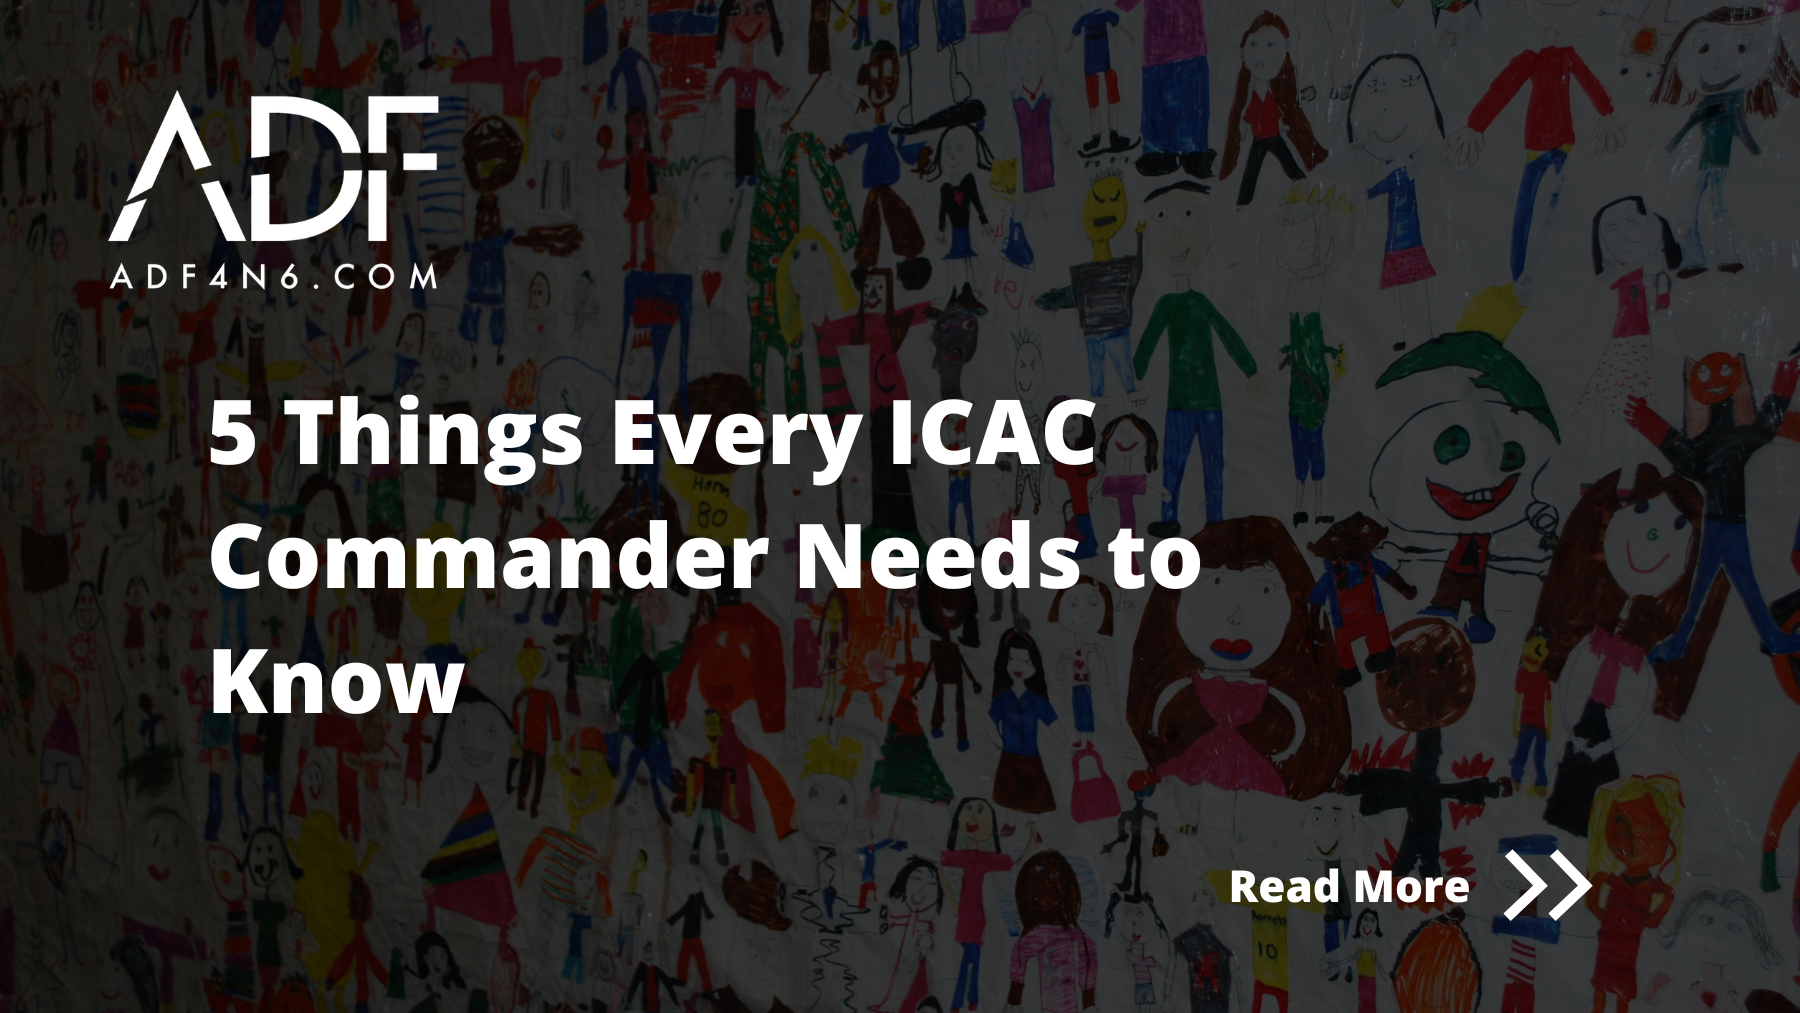 5 Things Every ICAC Commander Needs to Know